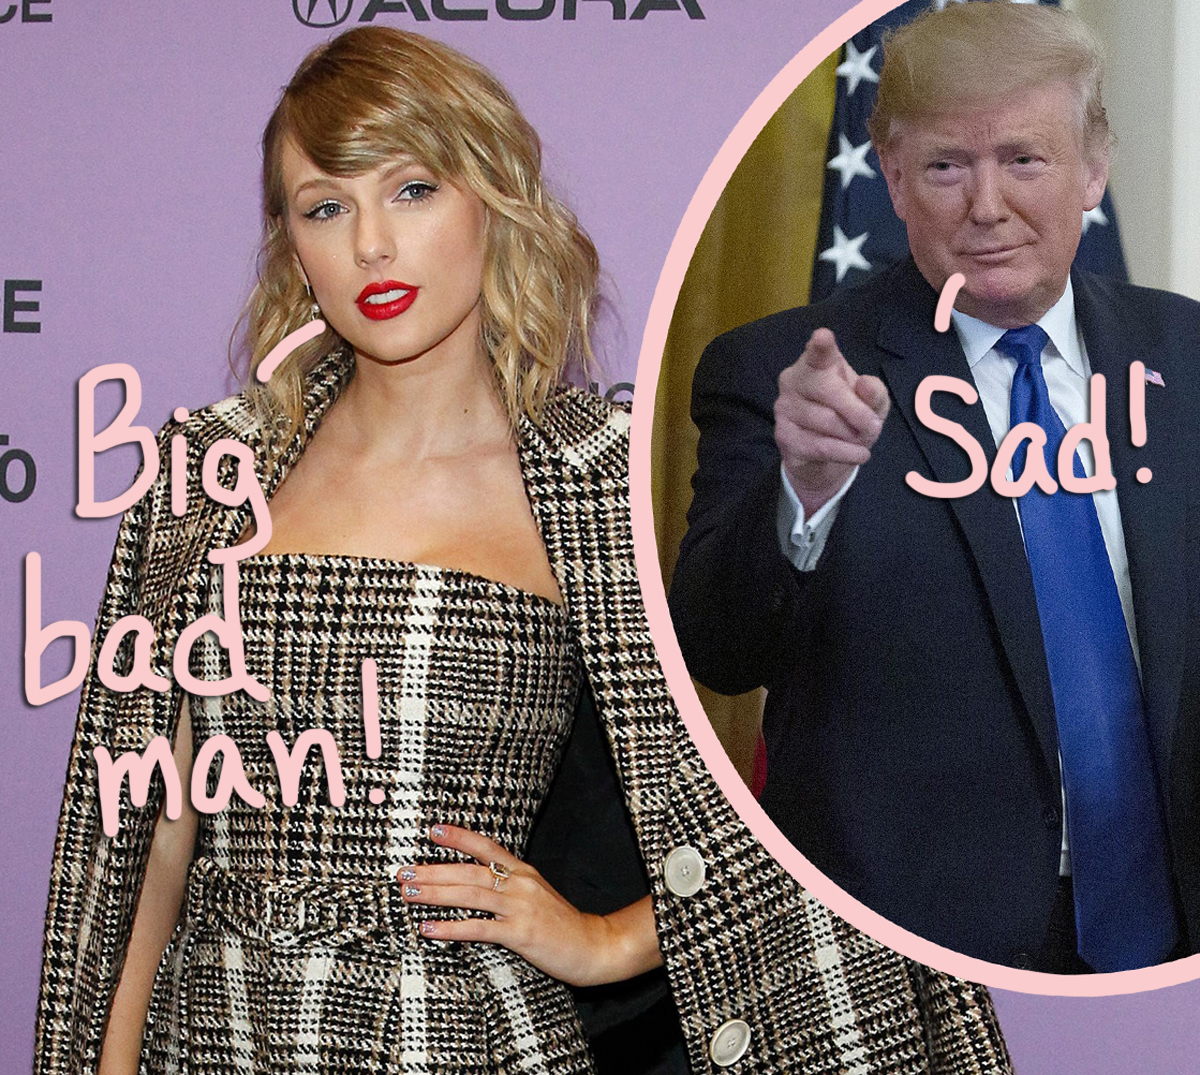 Taylor Swift Calls Out Donald Trump In New Political Anthem 'Only The